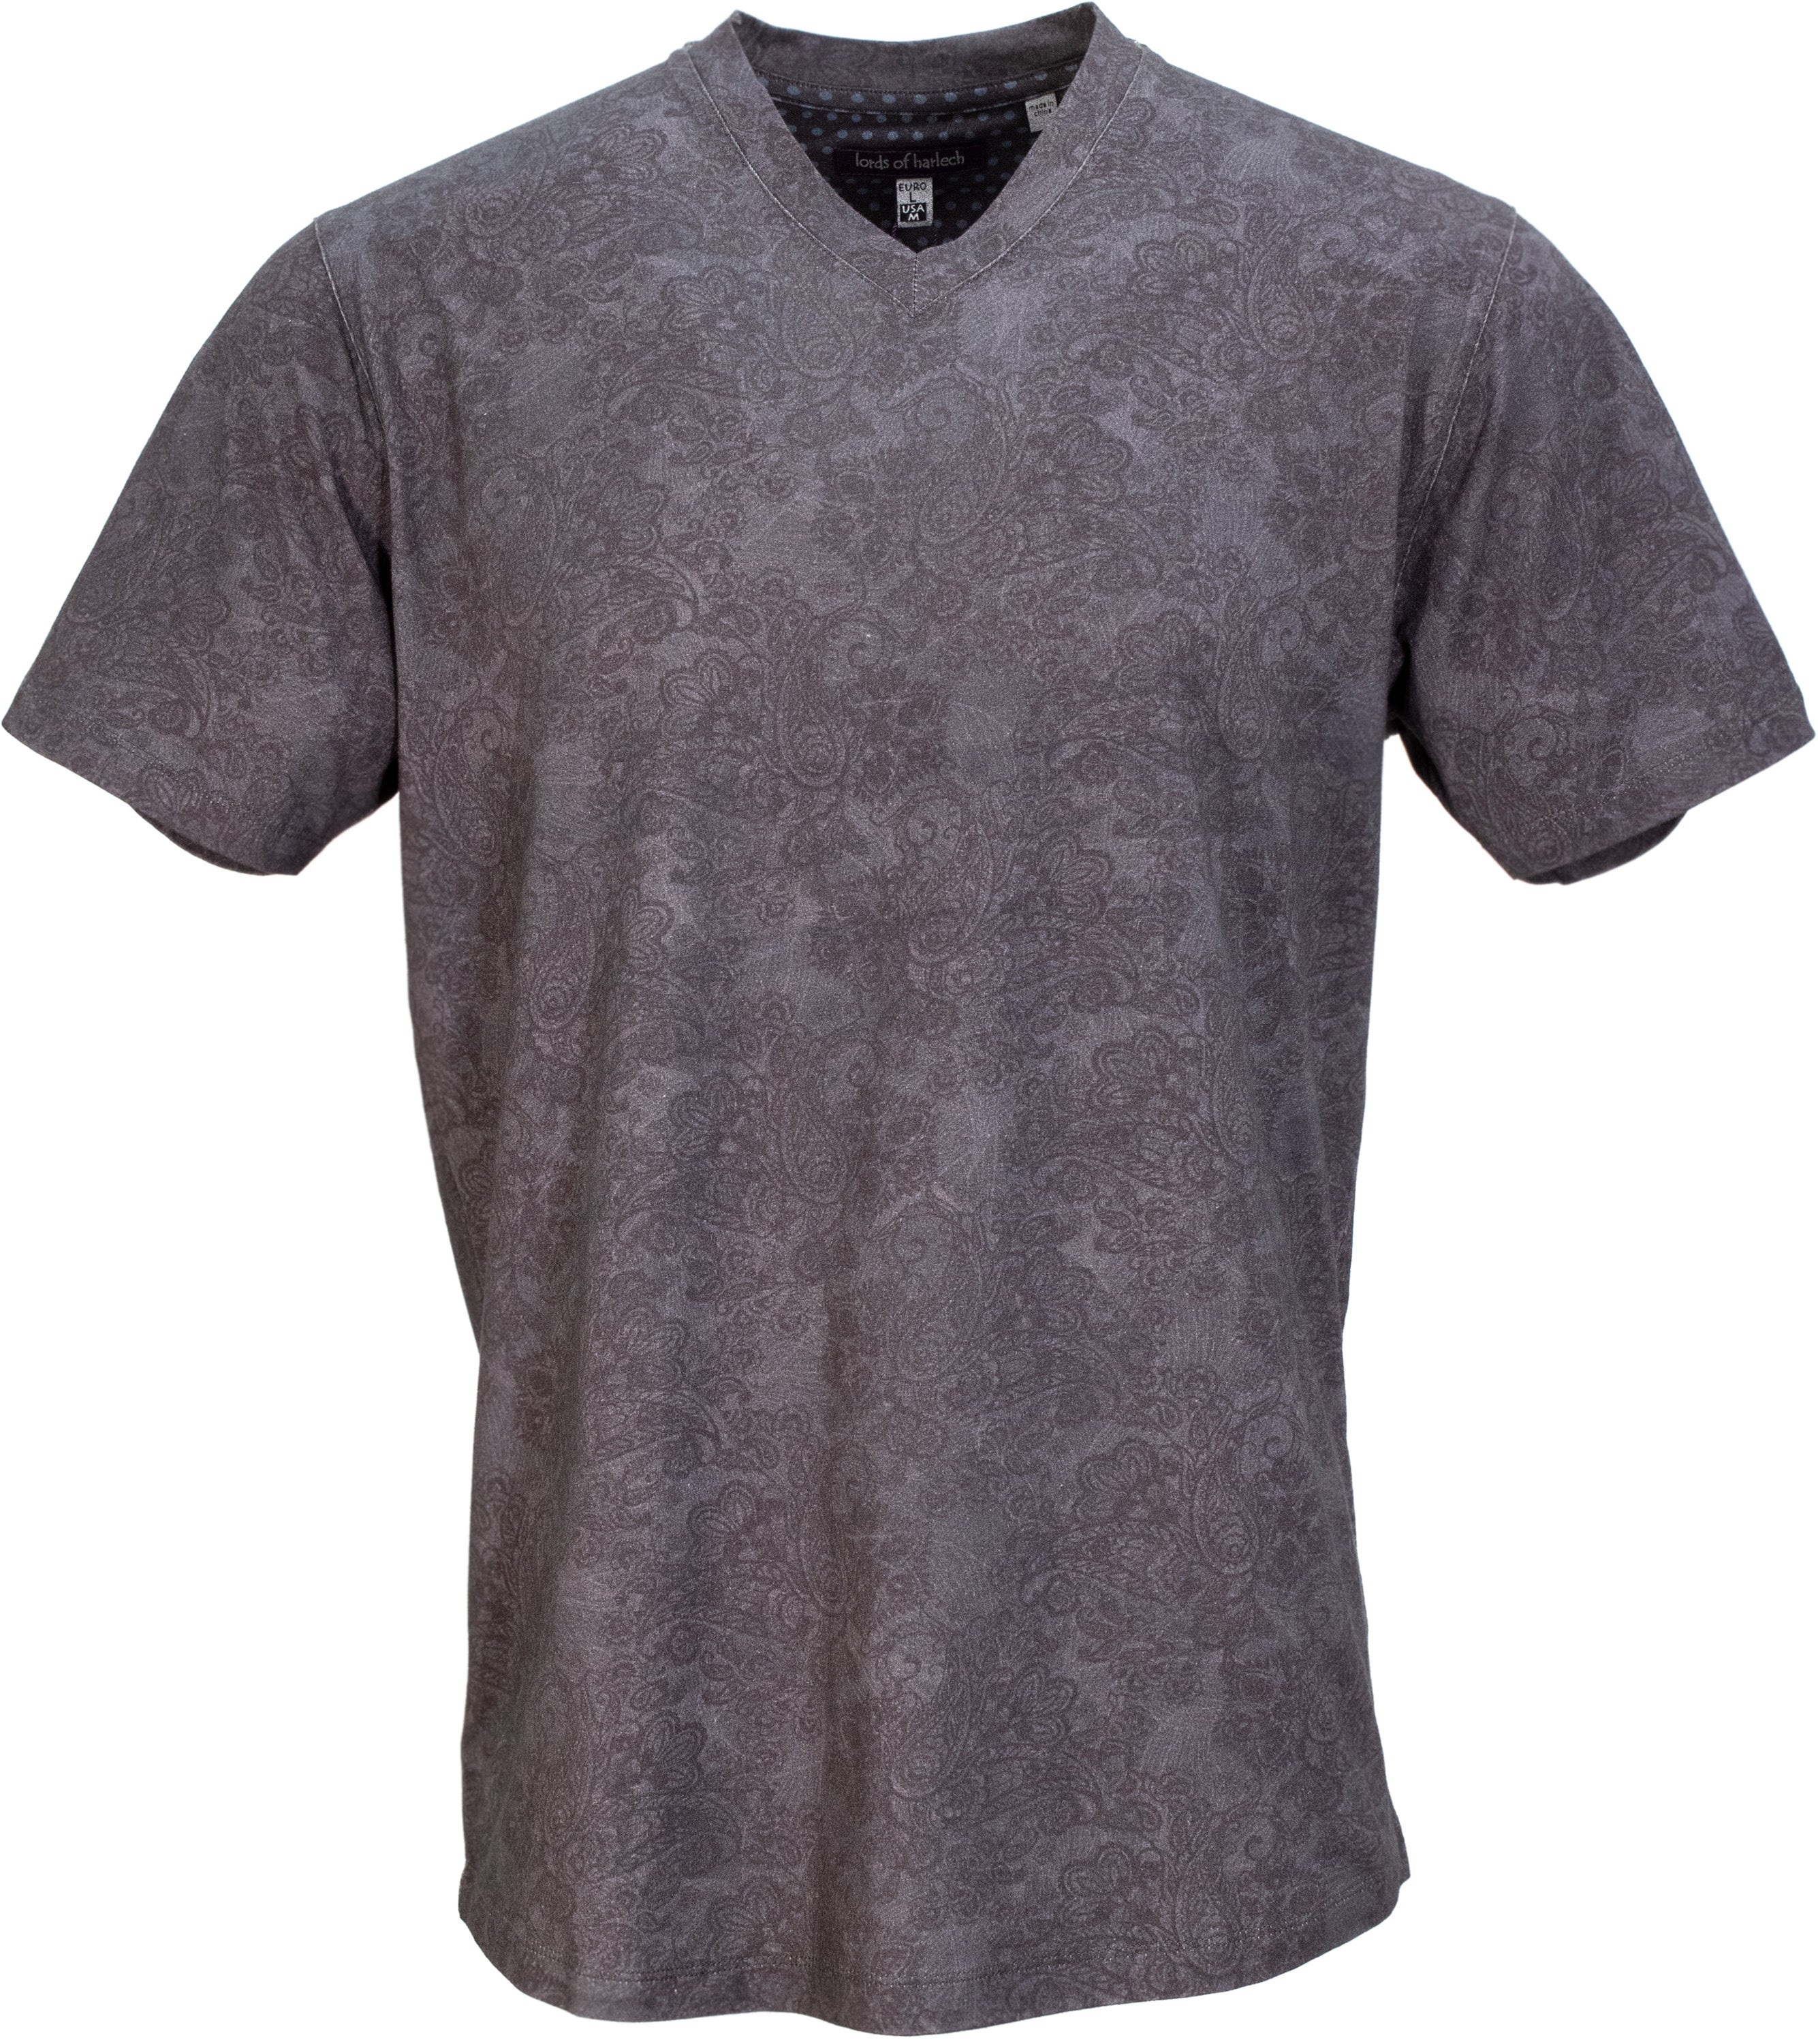 Men’s Neutrals / Black / Grey Maze Paisley Swirl V-Neck Tee In Black Small Lords of Harlech